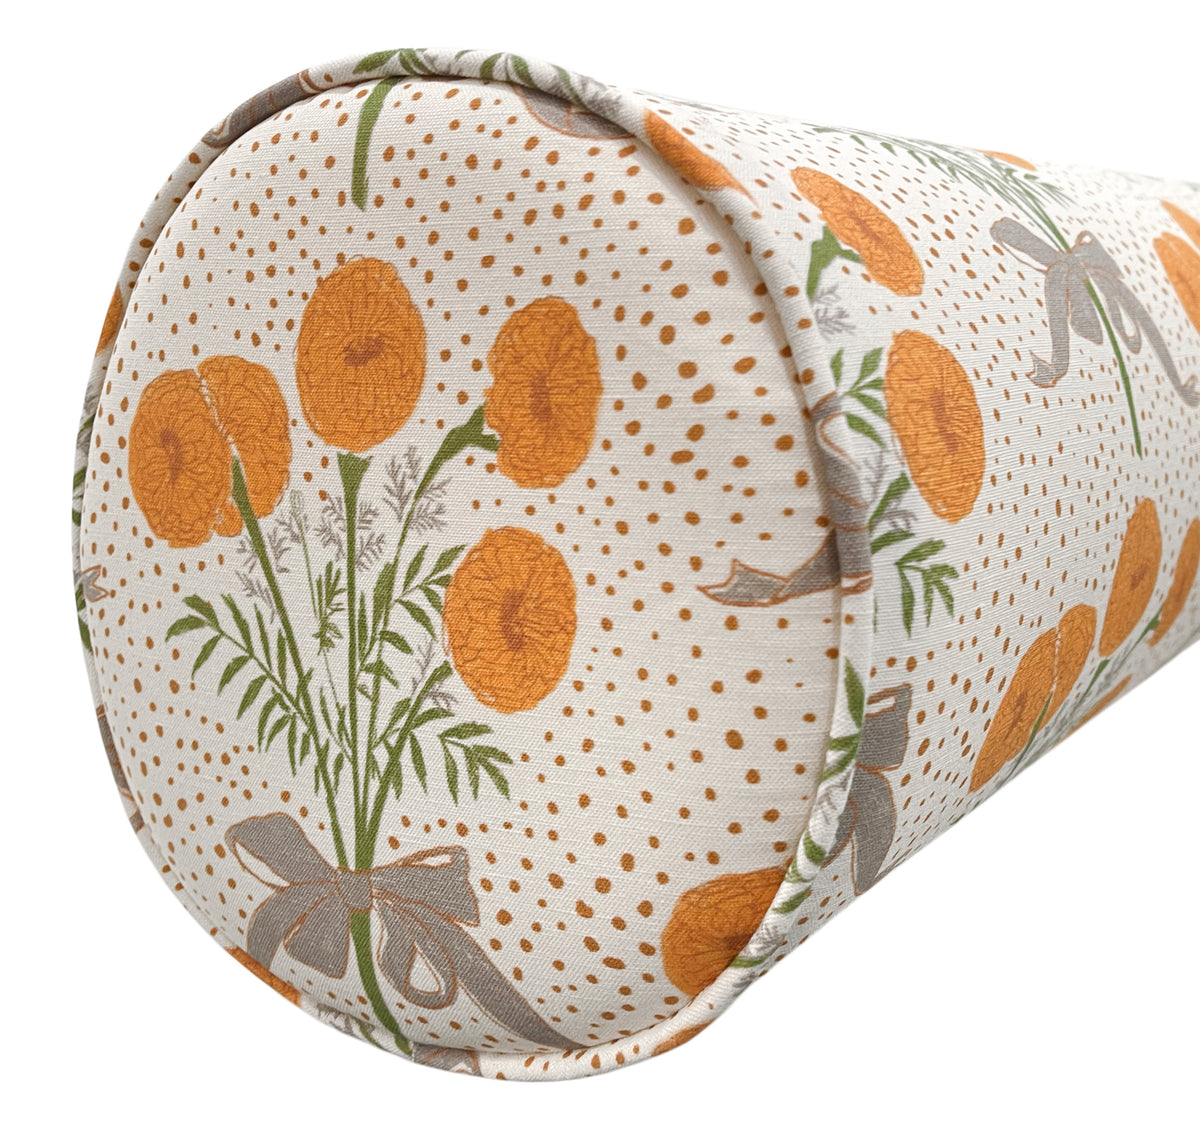 THE BOLSTER :: MARY // CITRUS ORANGE | LULIE WALLACE